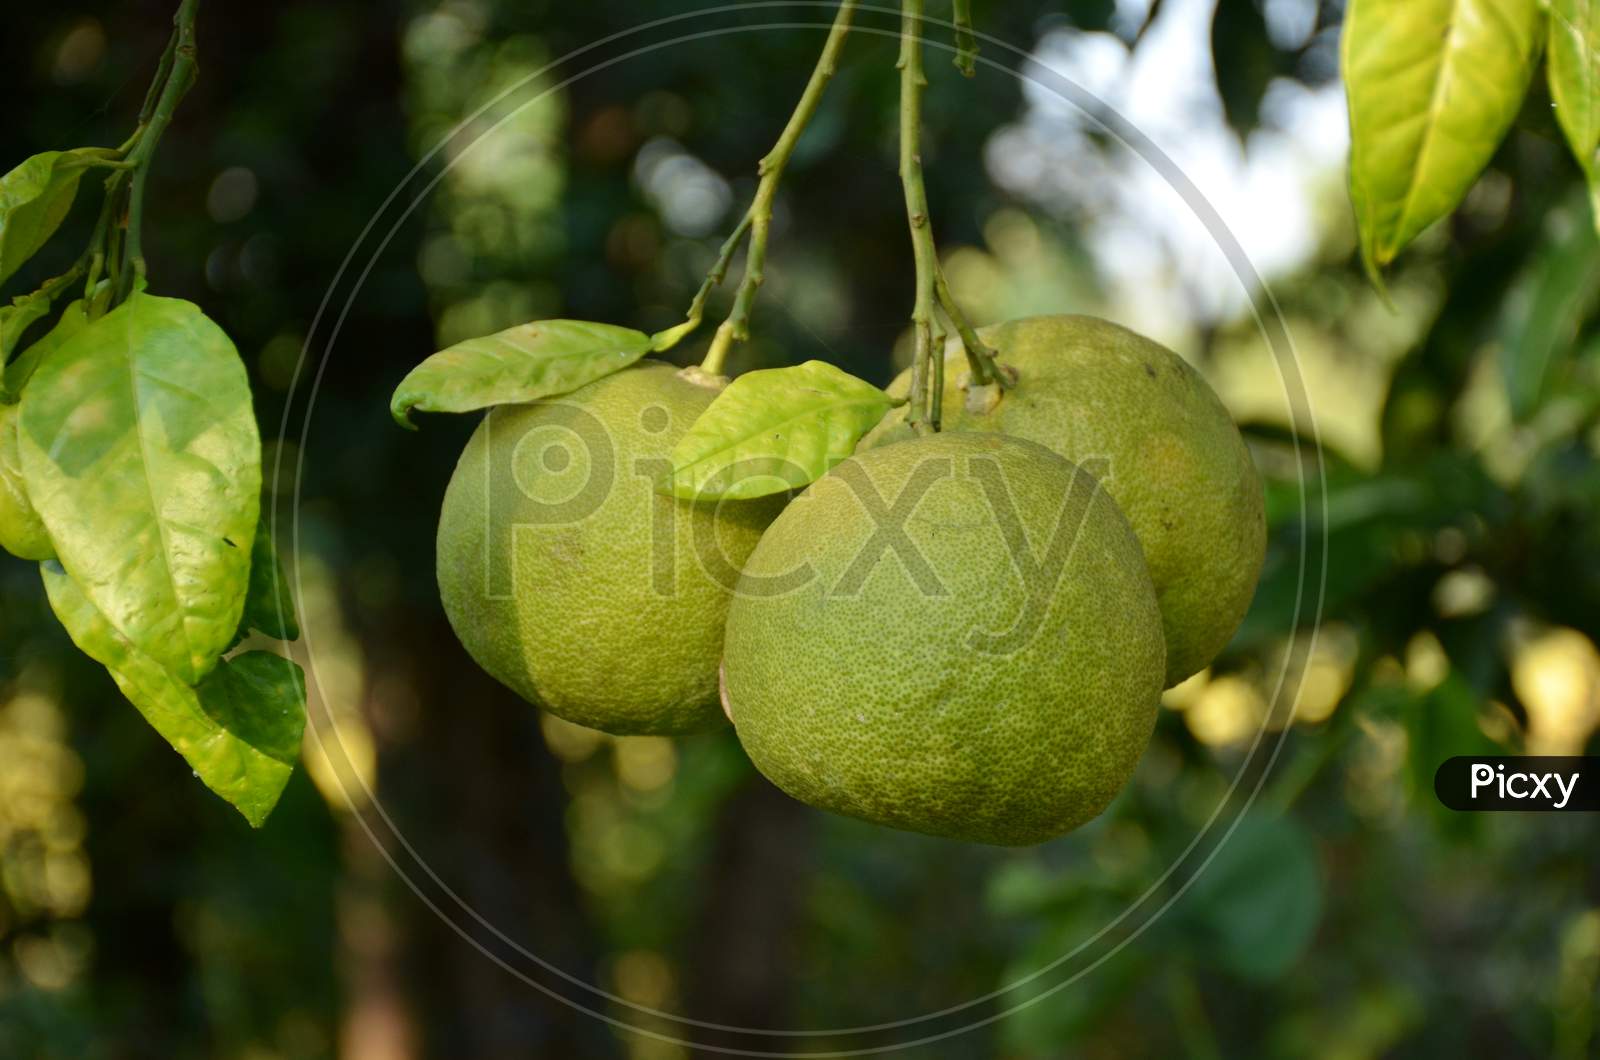 The Ripe Green Lime Fruit With Green Leaves And Branch In The Garden.